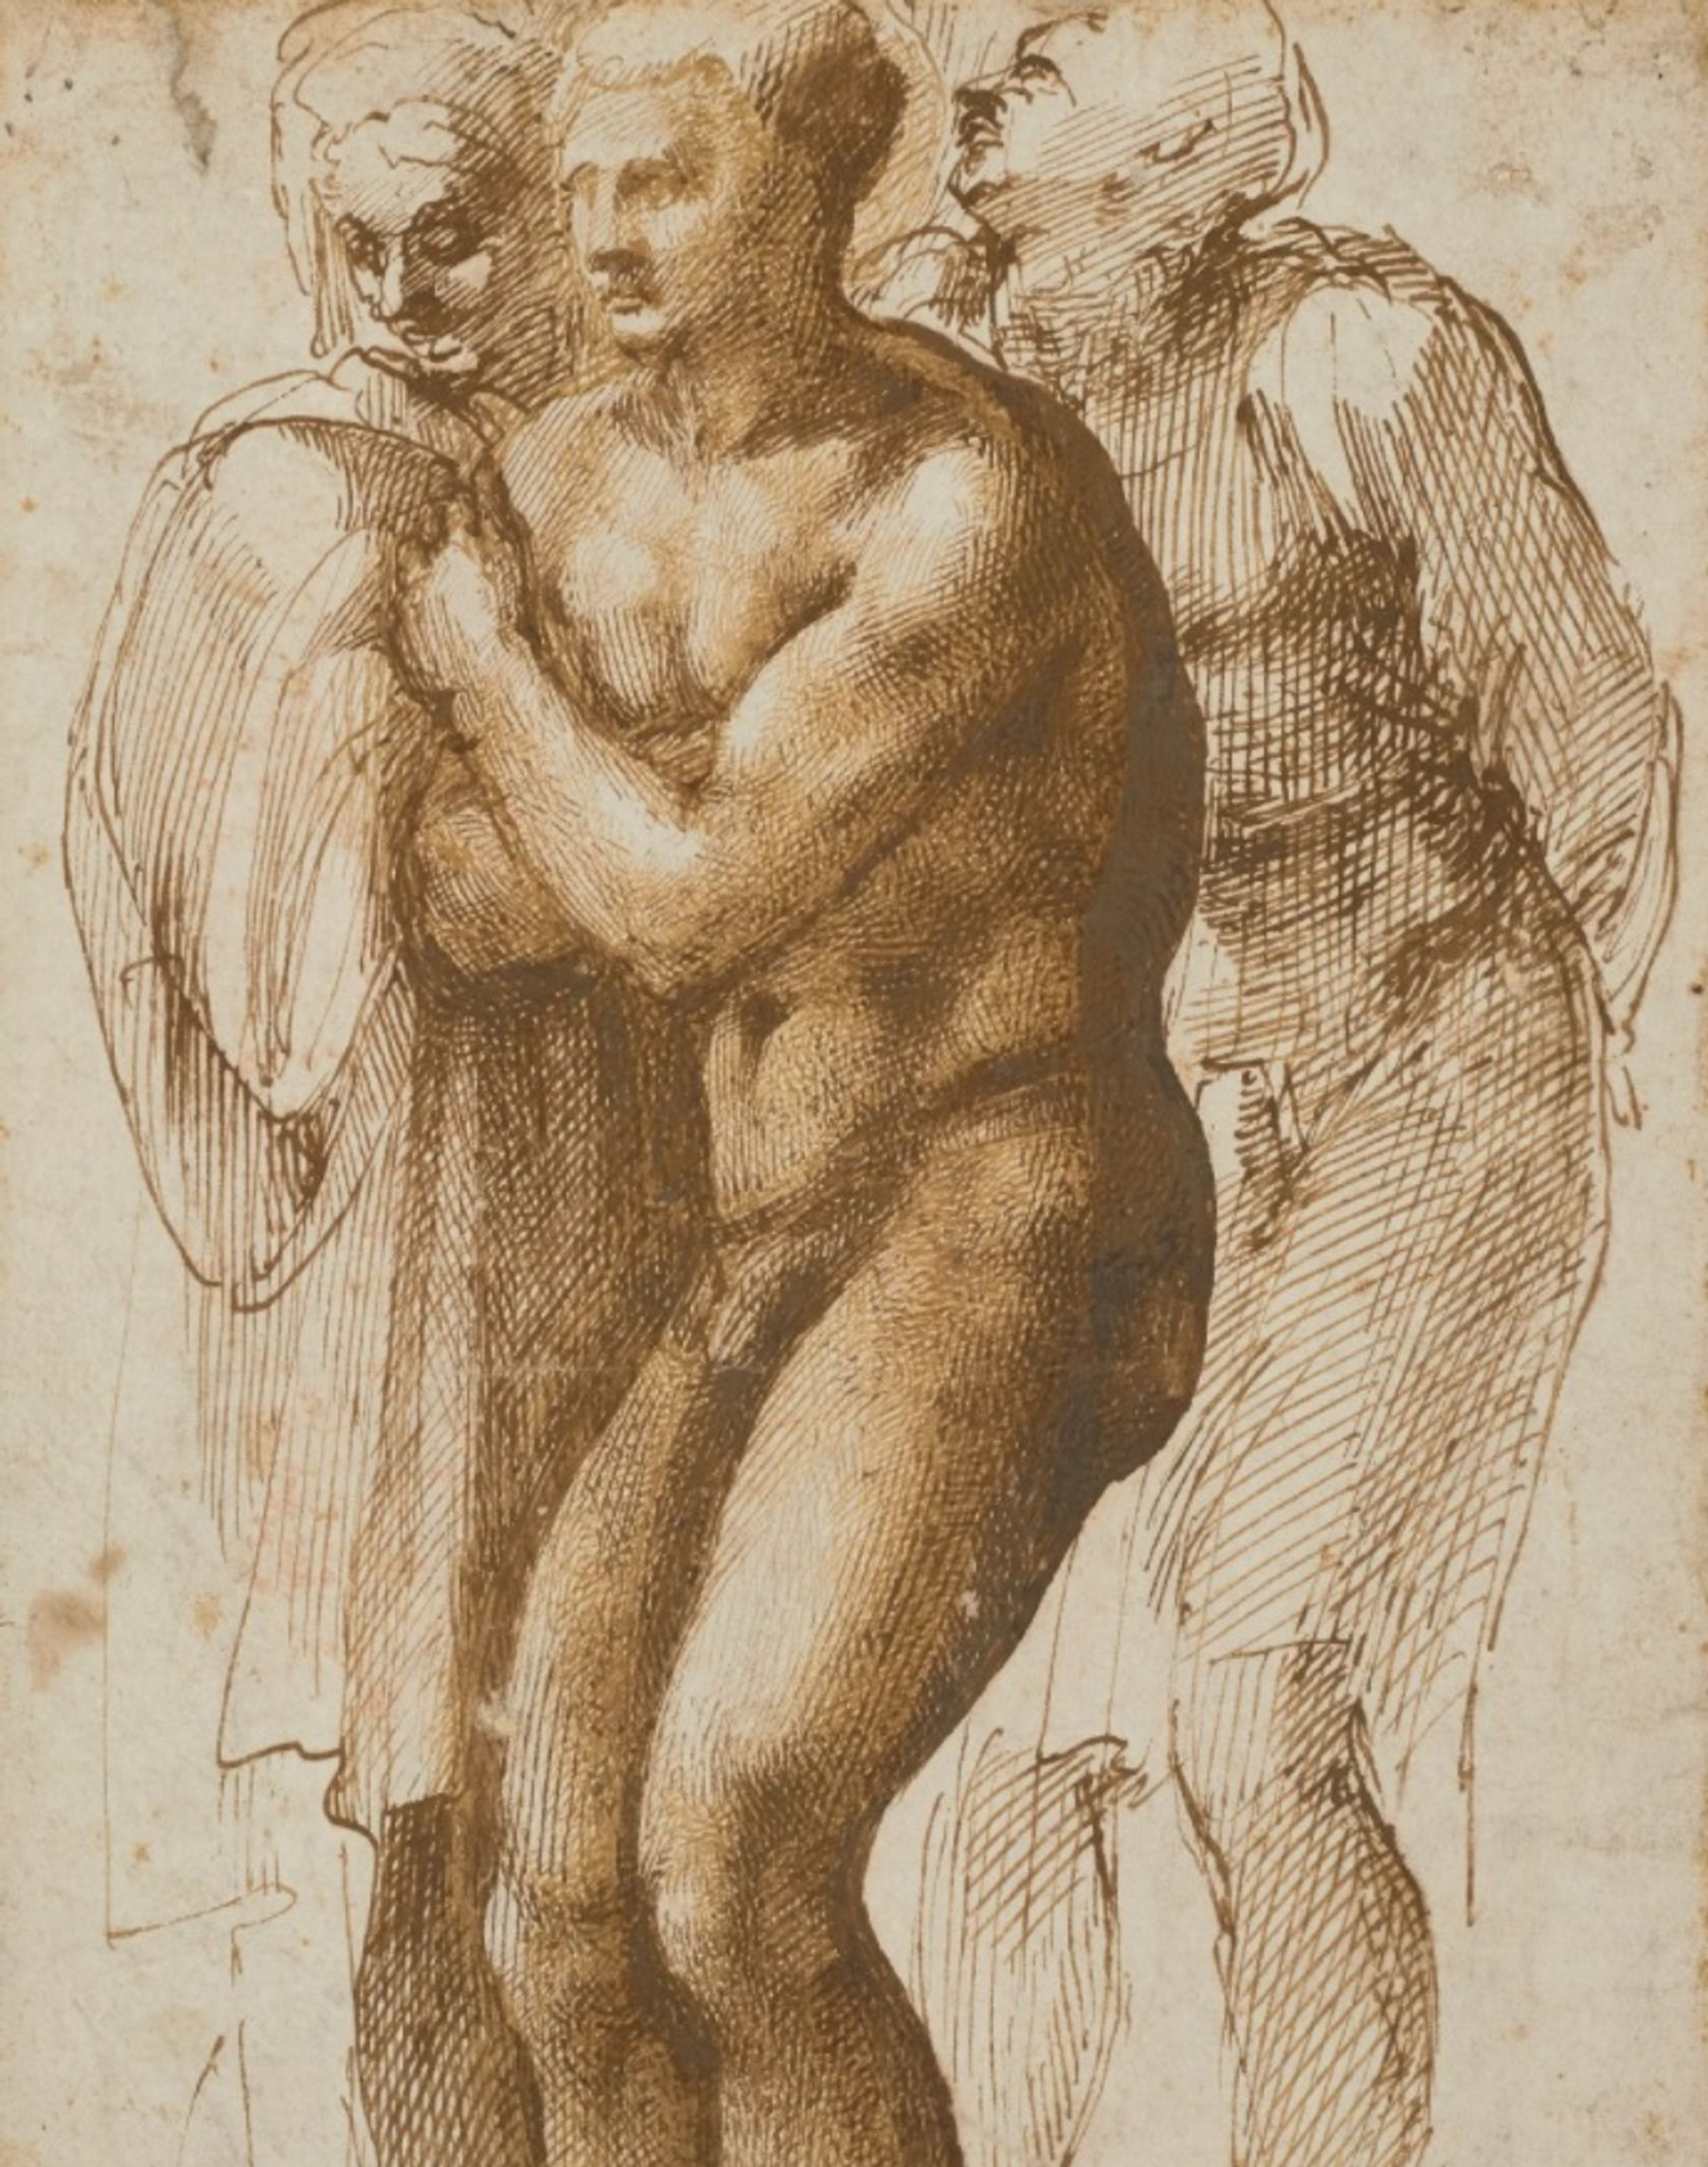 "A nude young man (after Masaccio) surrounded by two figures " (סוף המאה ה-15) של מיכלאנג'לו

© Christie's Images Limited, 2022